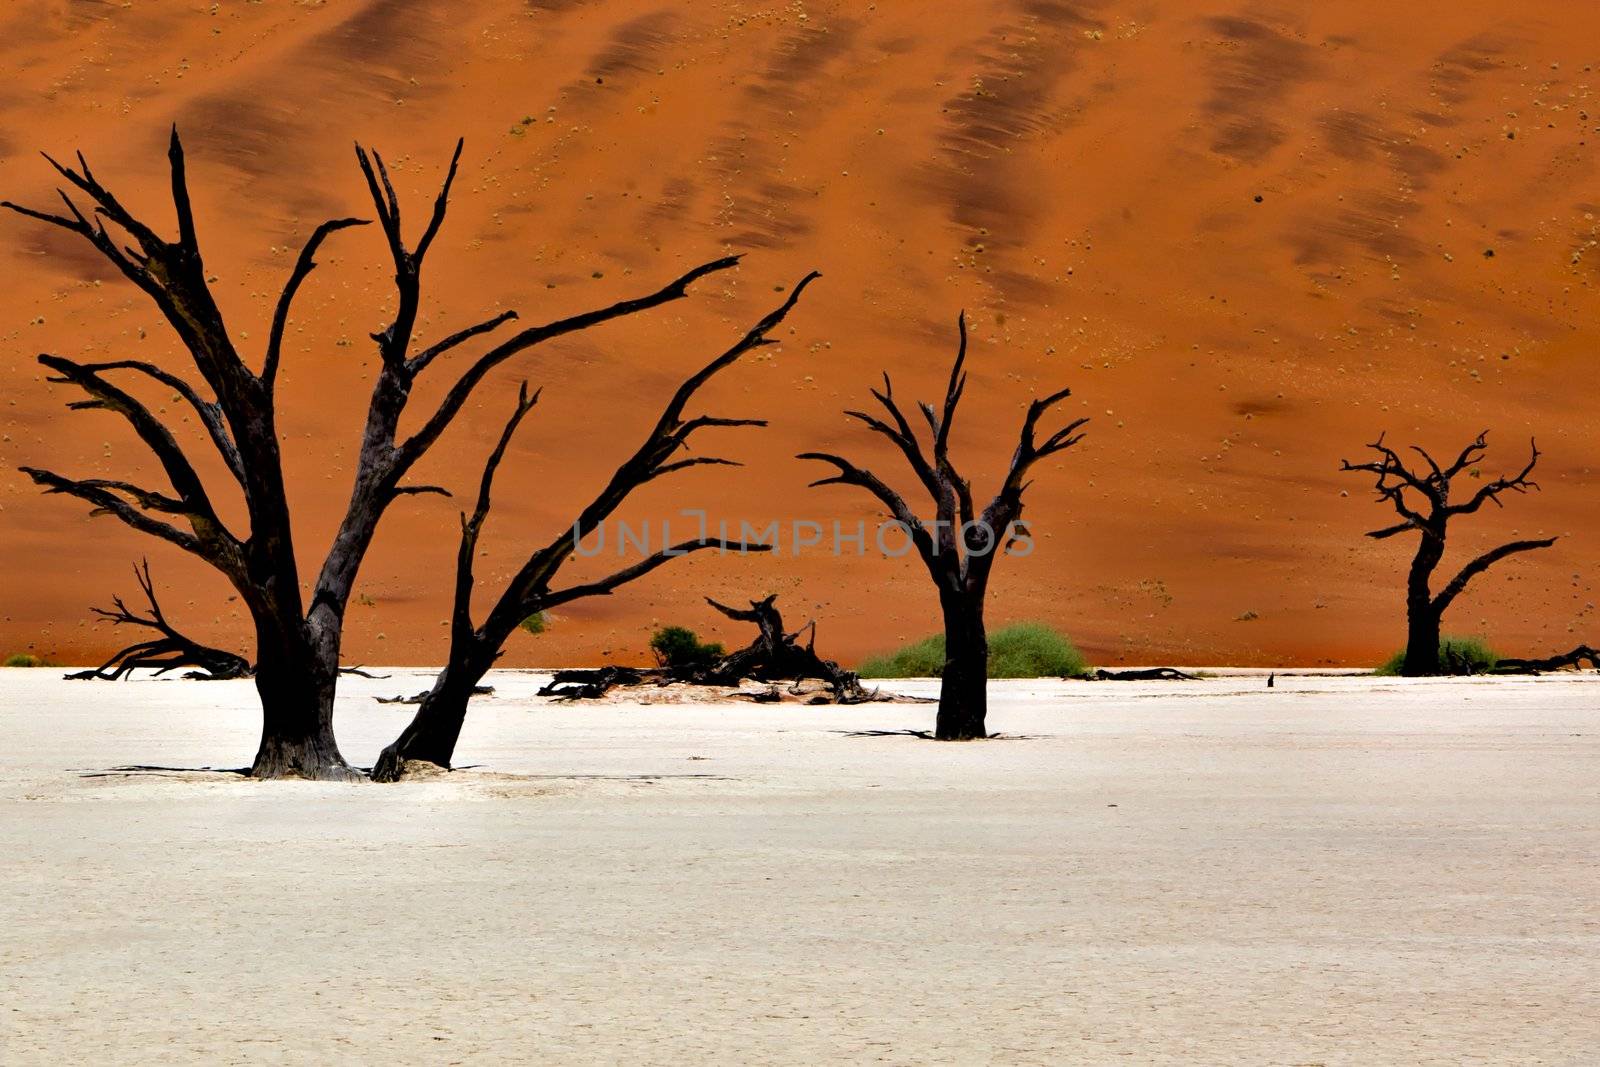 dead trees in front of a orange dune in deadvlei namib naukluft national park namibia